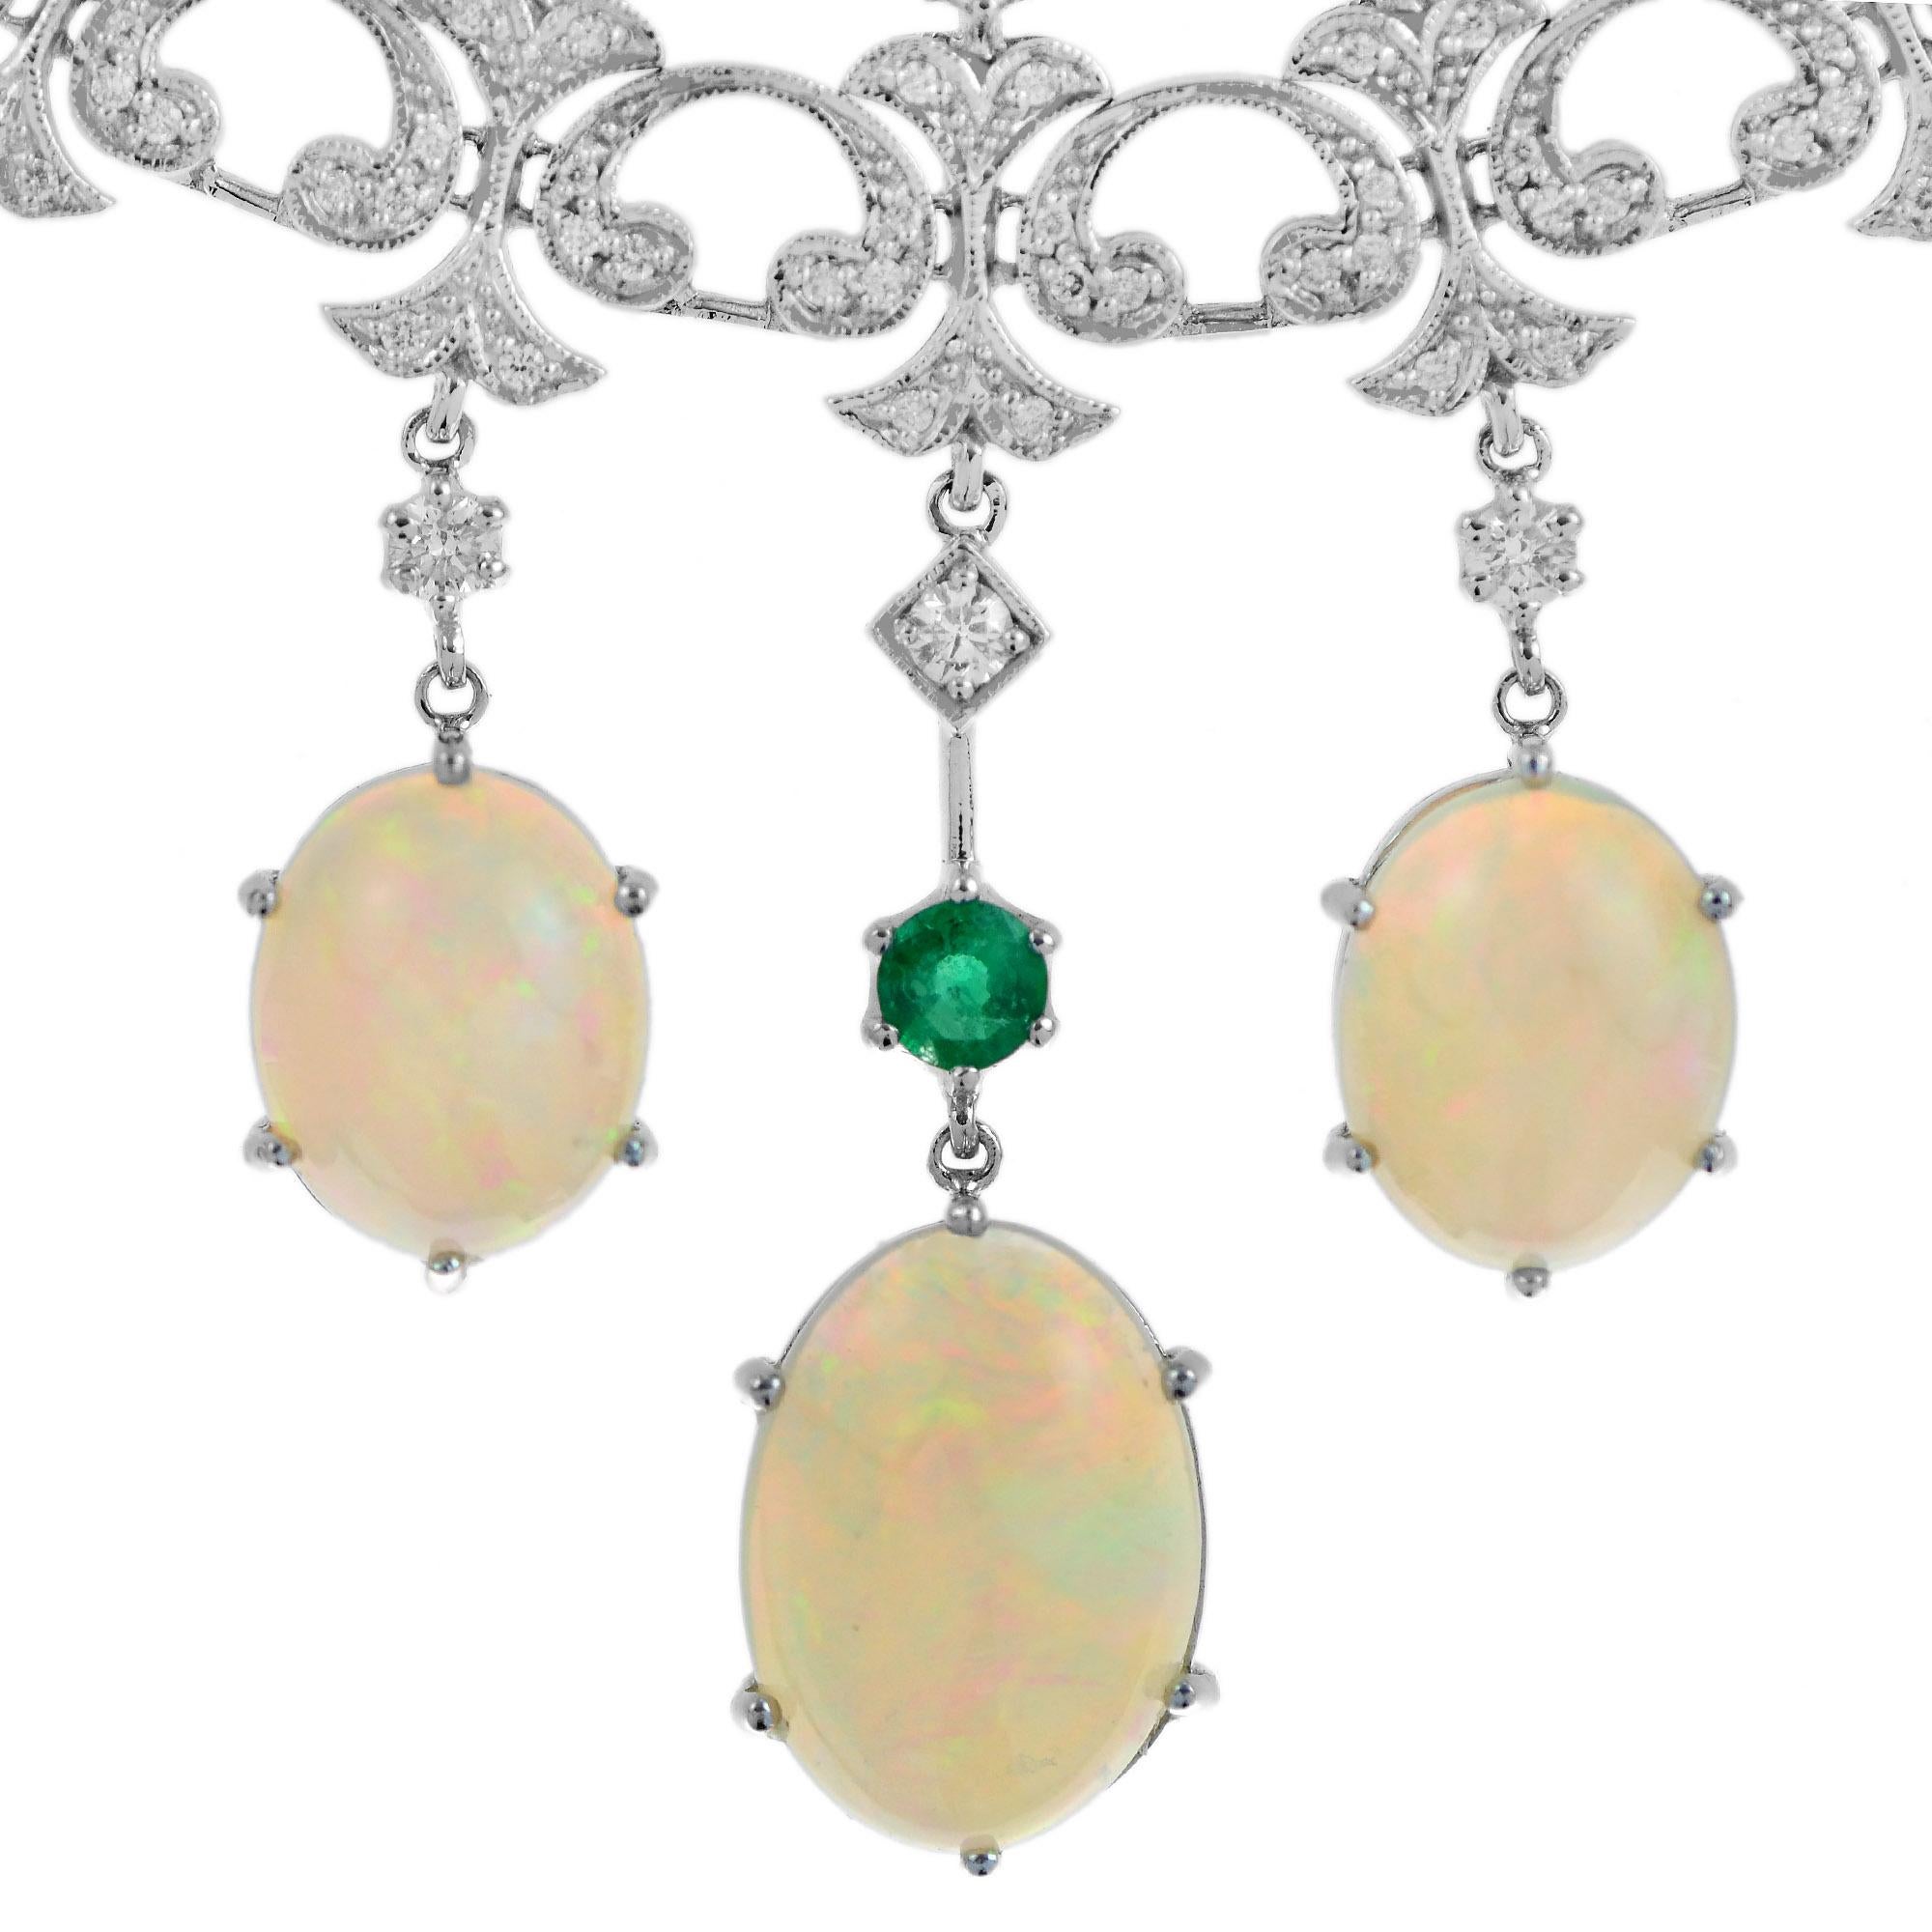 The design of the necklace represent the style of the Victorian era with its complex, intricate detailing designs and graduating fringes. The main feature on the necklace is oval shaped Australian opals. The total of 54.44 carats opal in this